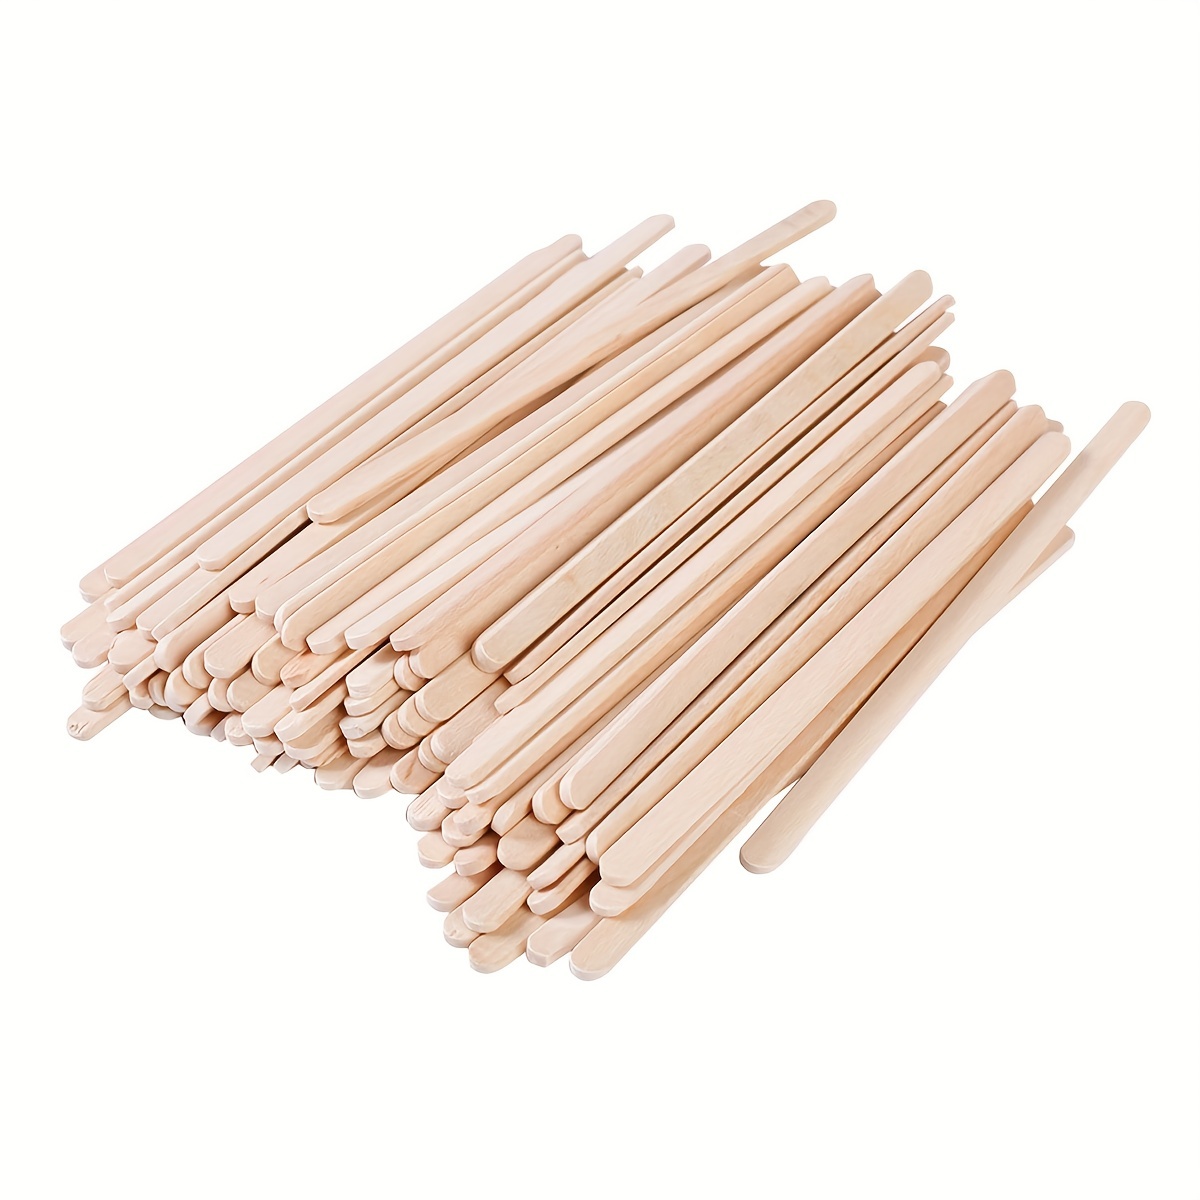 Eco-Products Wooden Stir Sticks 7 inch Birch Wood Natural - Includes Ten Packs of 1000 each.